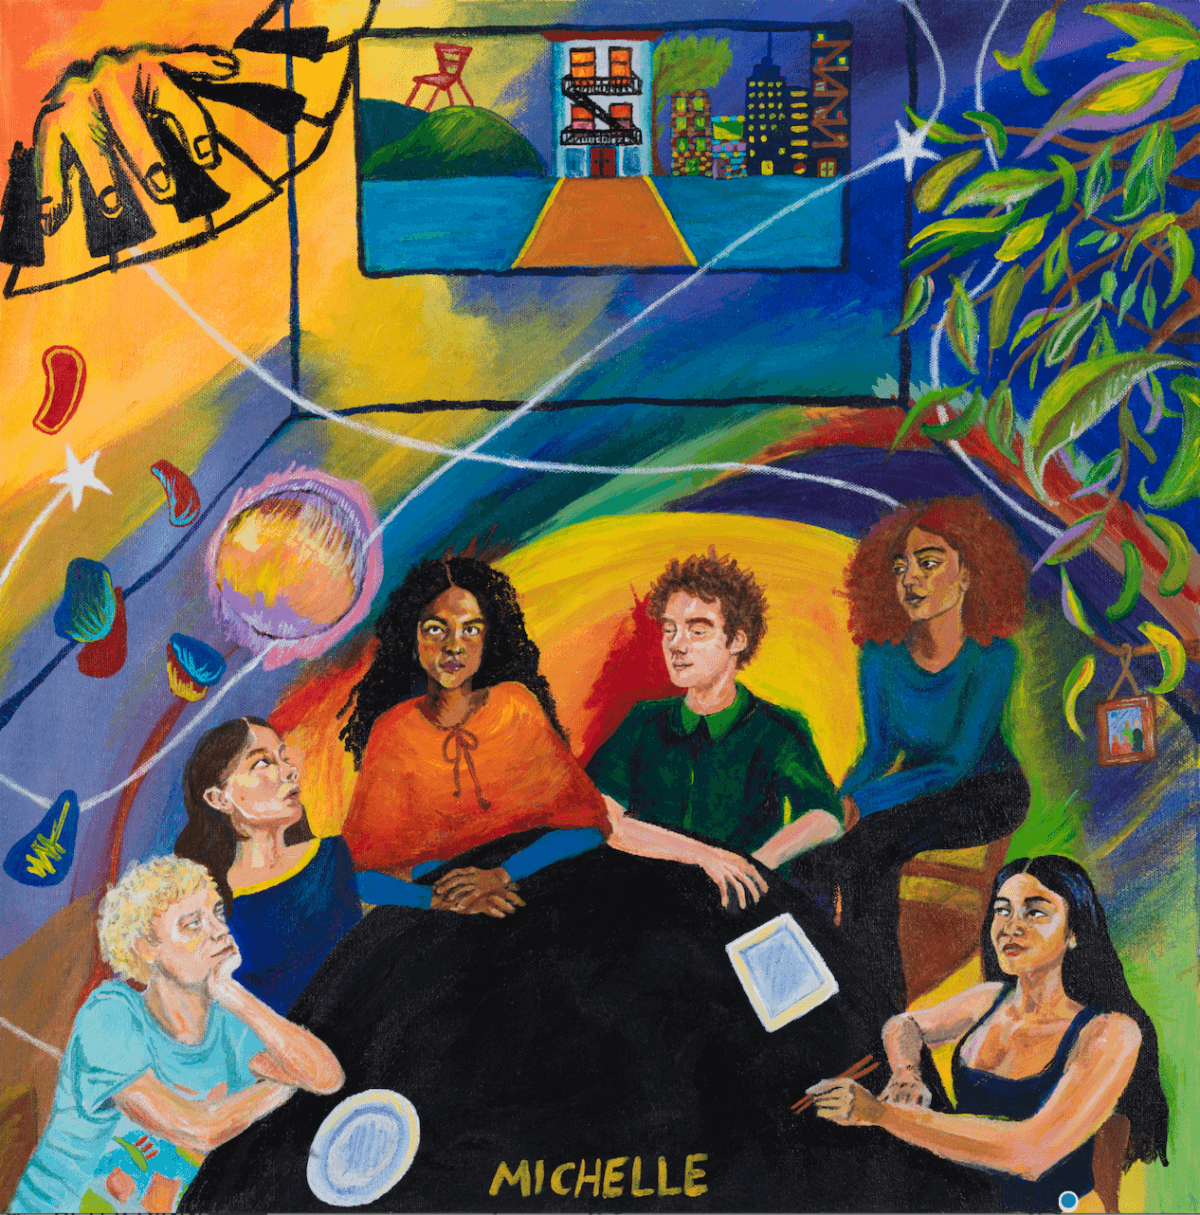 Michelle Share New Video For "Pose." The track is off the New York City band's forthcoming release After Dinner We Talk Dreams, out March 4th